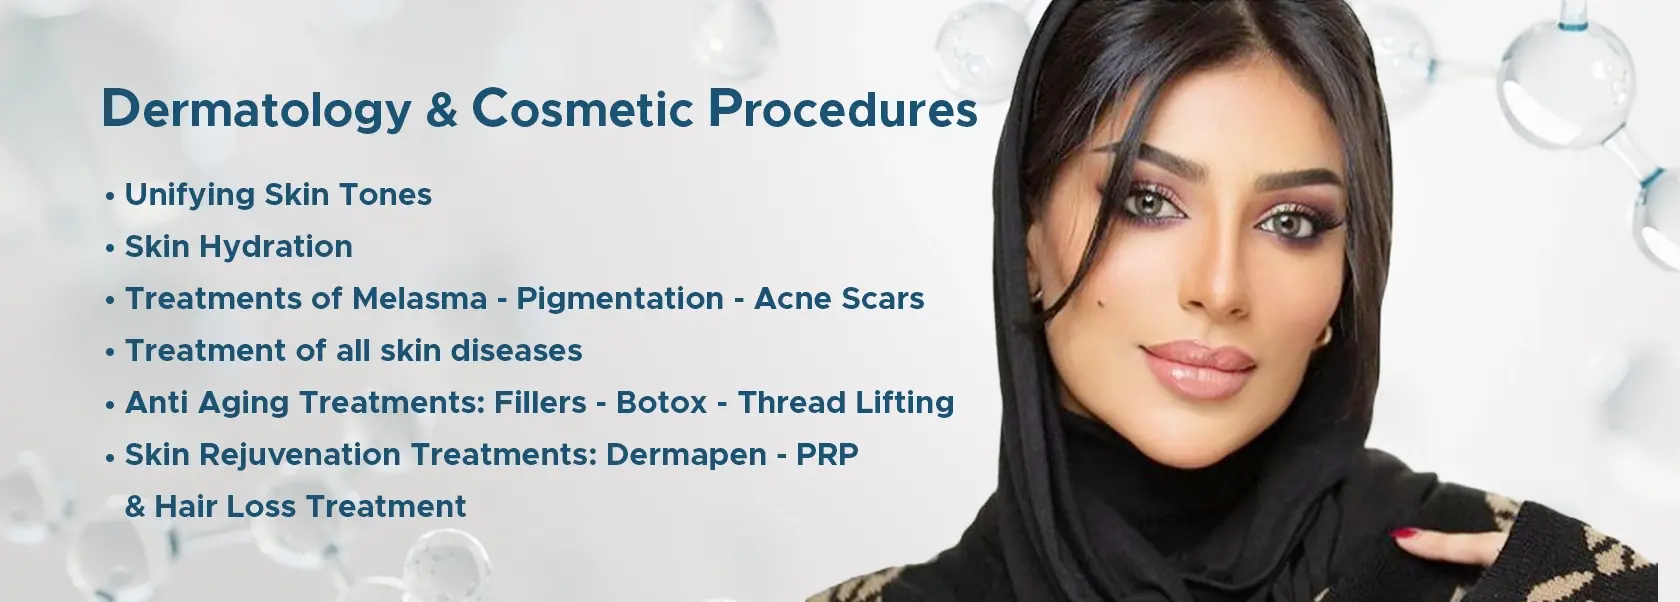 Dermatology & Cosmetic Procedures in procare avenues medical center is Unifying Skin Tones Skin Hydration Treatments of Melasma - Pigmentation - Acne Scars Treatment of all skin diseases Anti Aging Treatments: Fillers - Botox - Thread Lifting Skin Rejuvenation Treatments: Dermapen - PRP & Hair Loss Center